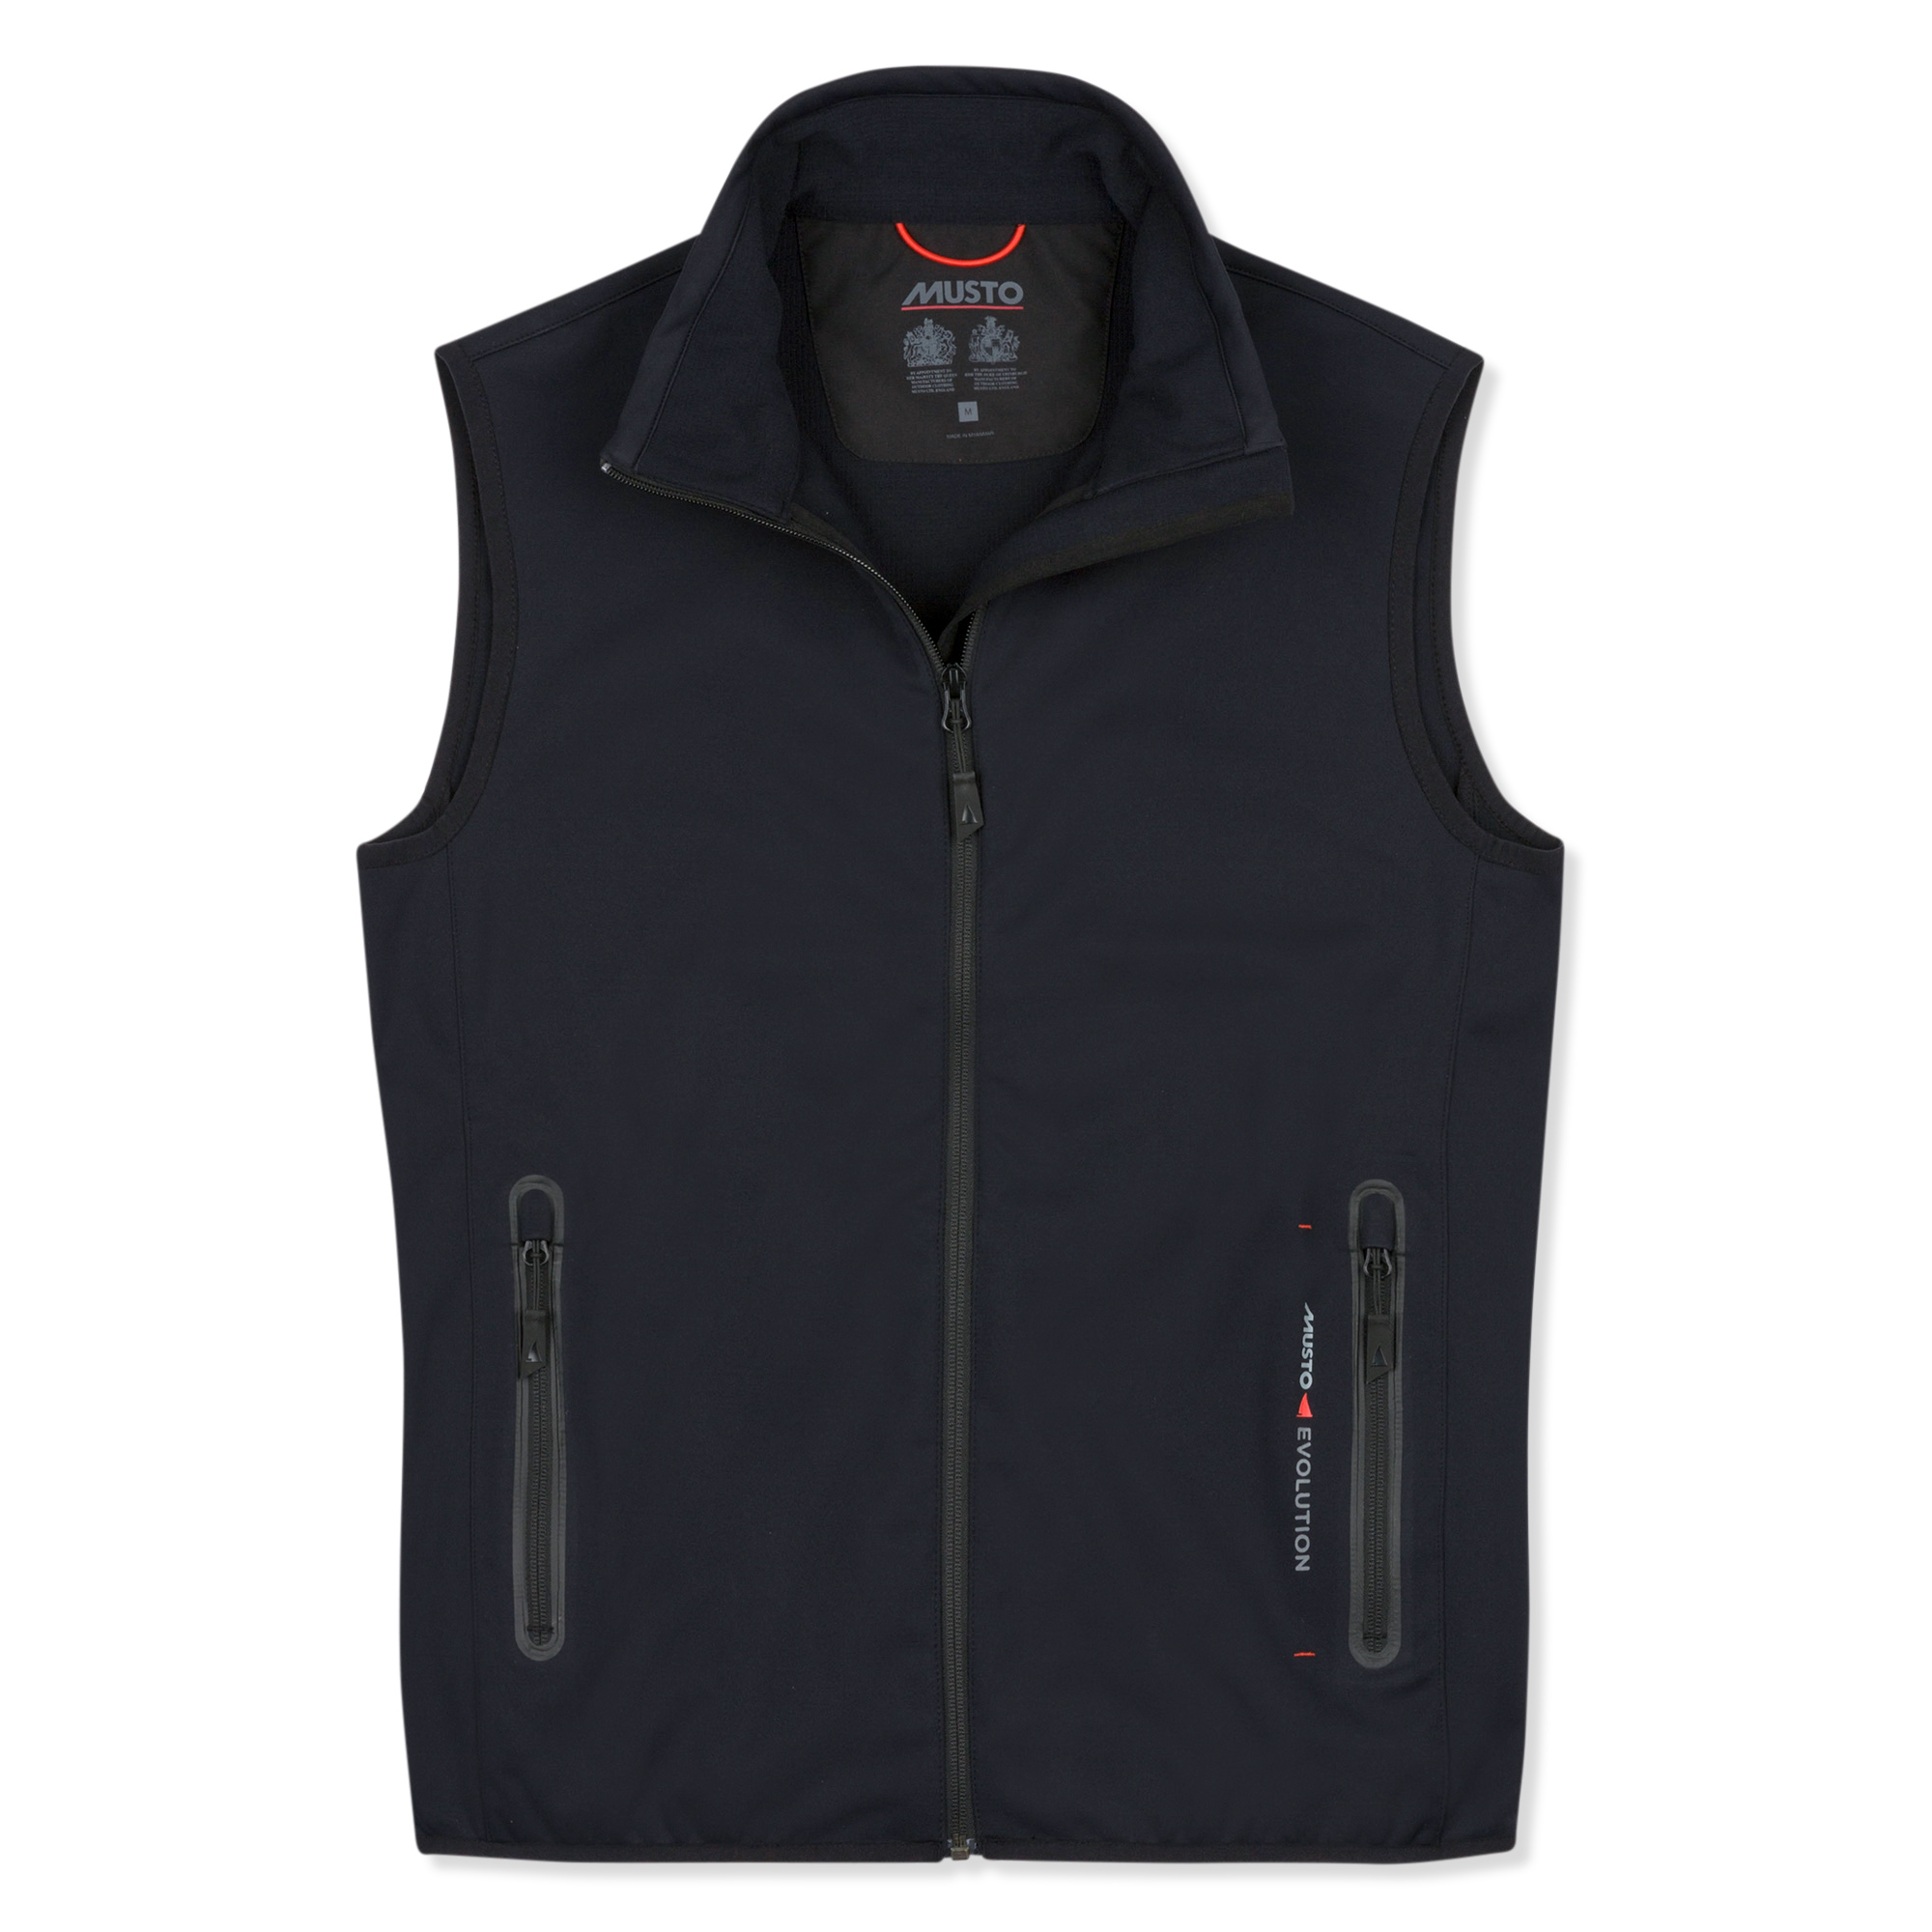 Crew Softshell Gilet by Musto